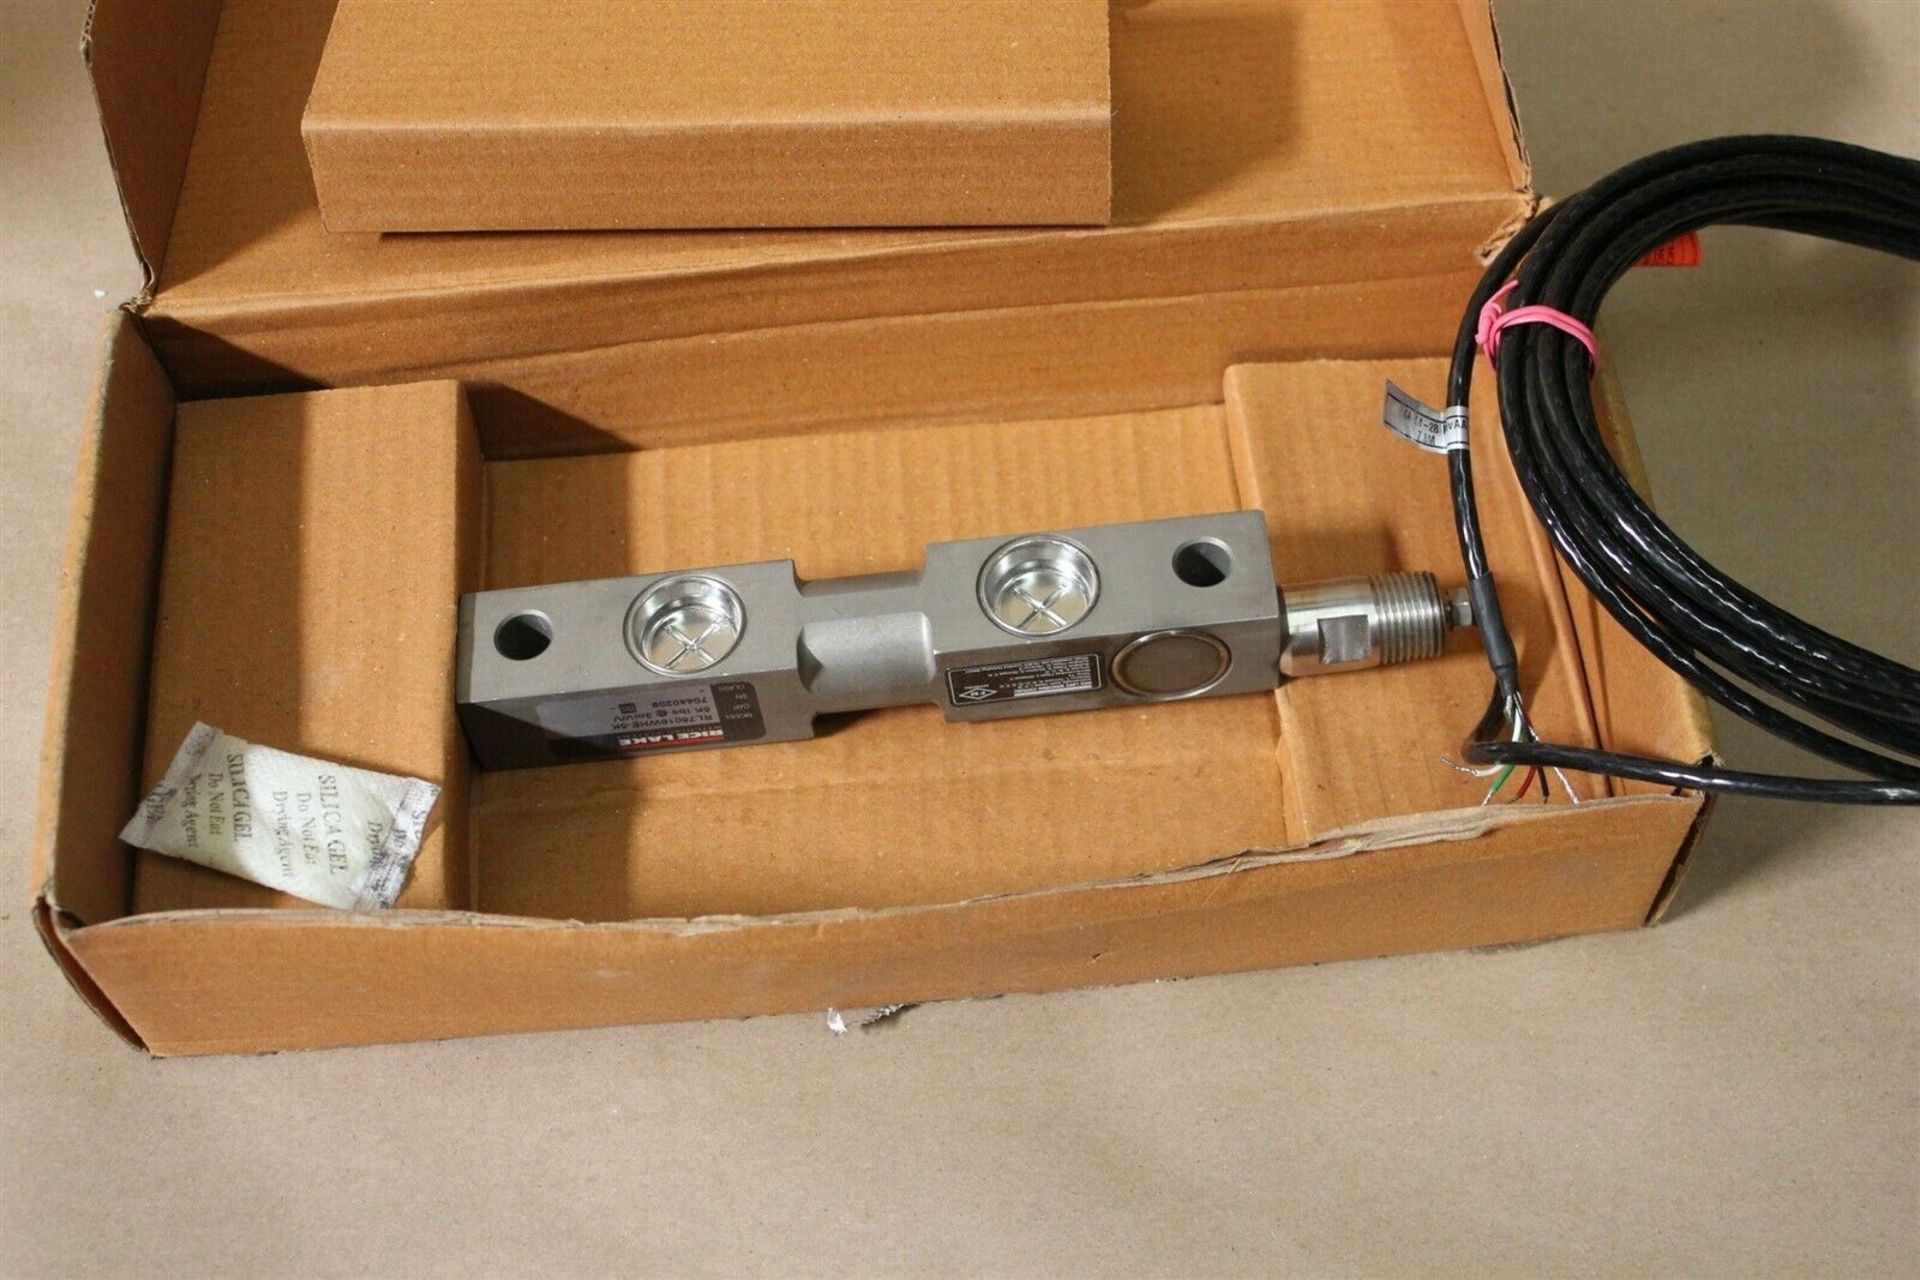 NEW RICE LAKE LOAD CELL TRANSDUCER - Image 5 of 7